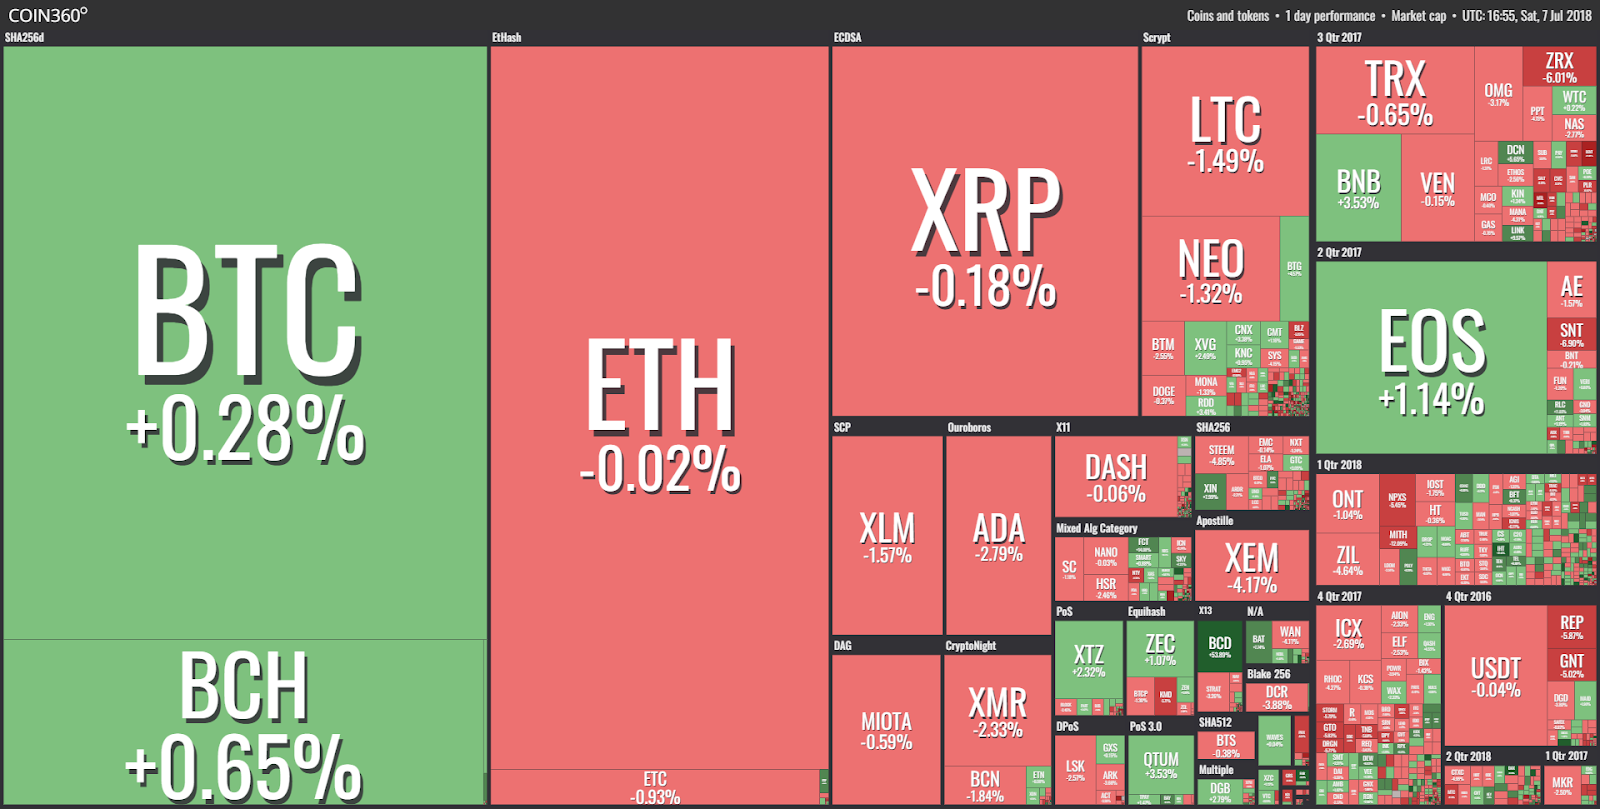 Market visualization from Coin360